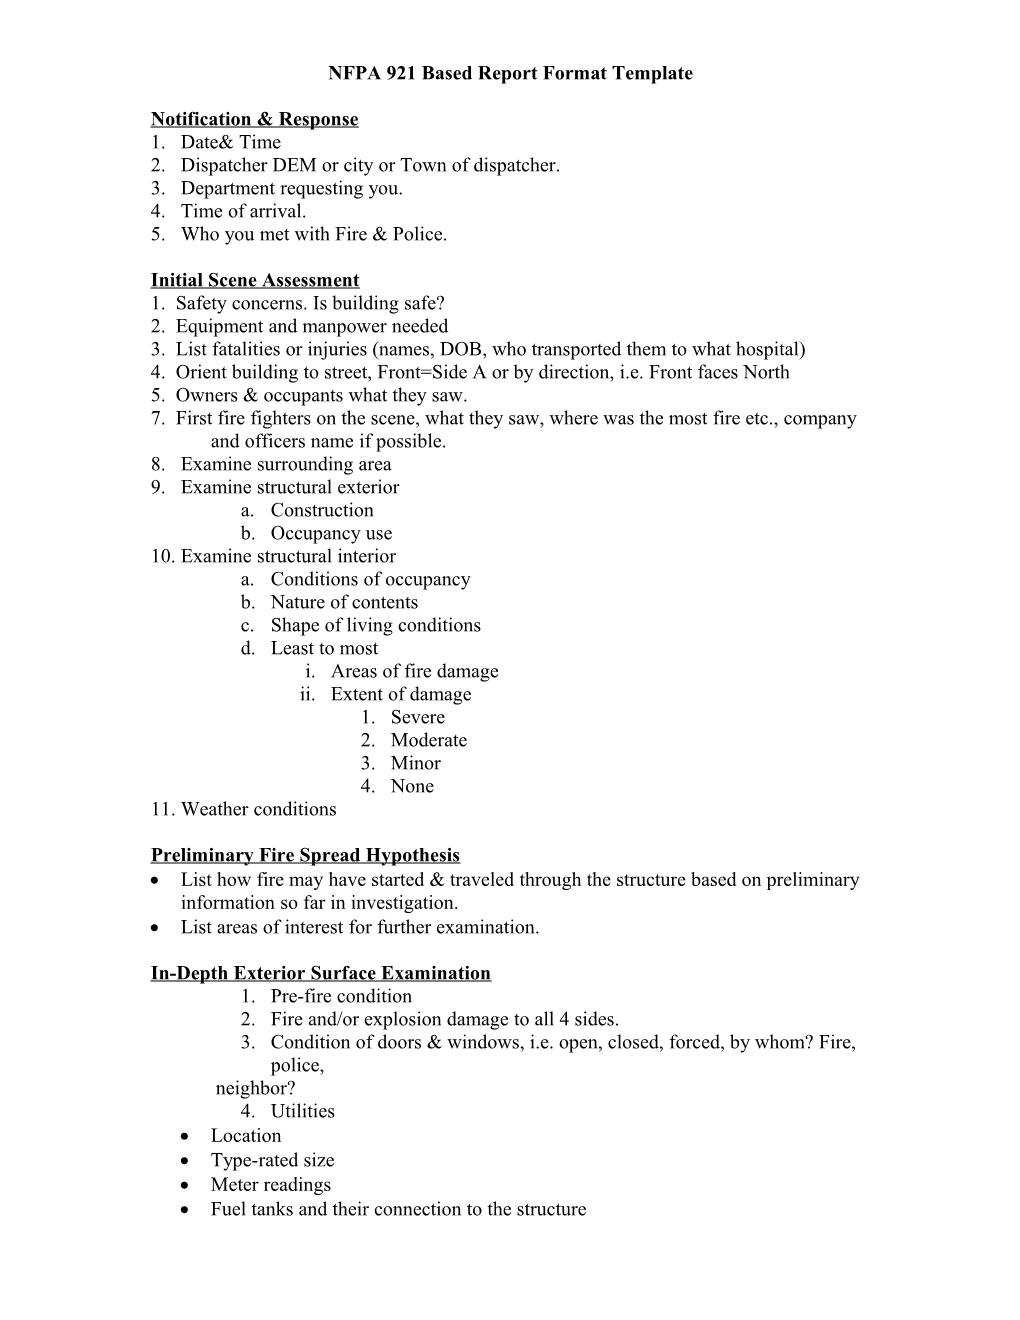 NFPA 921 Based Report Format Template